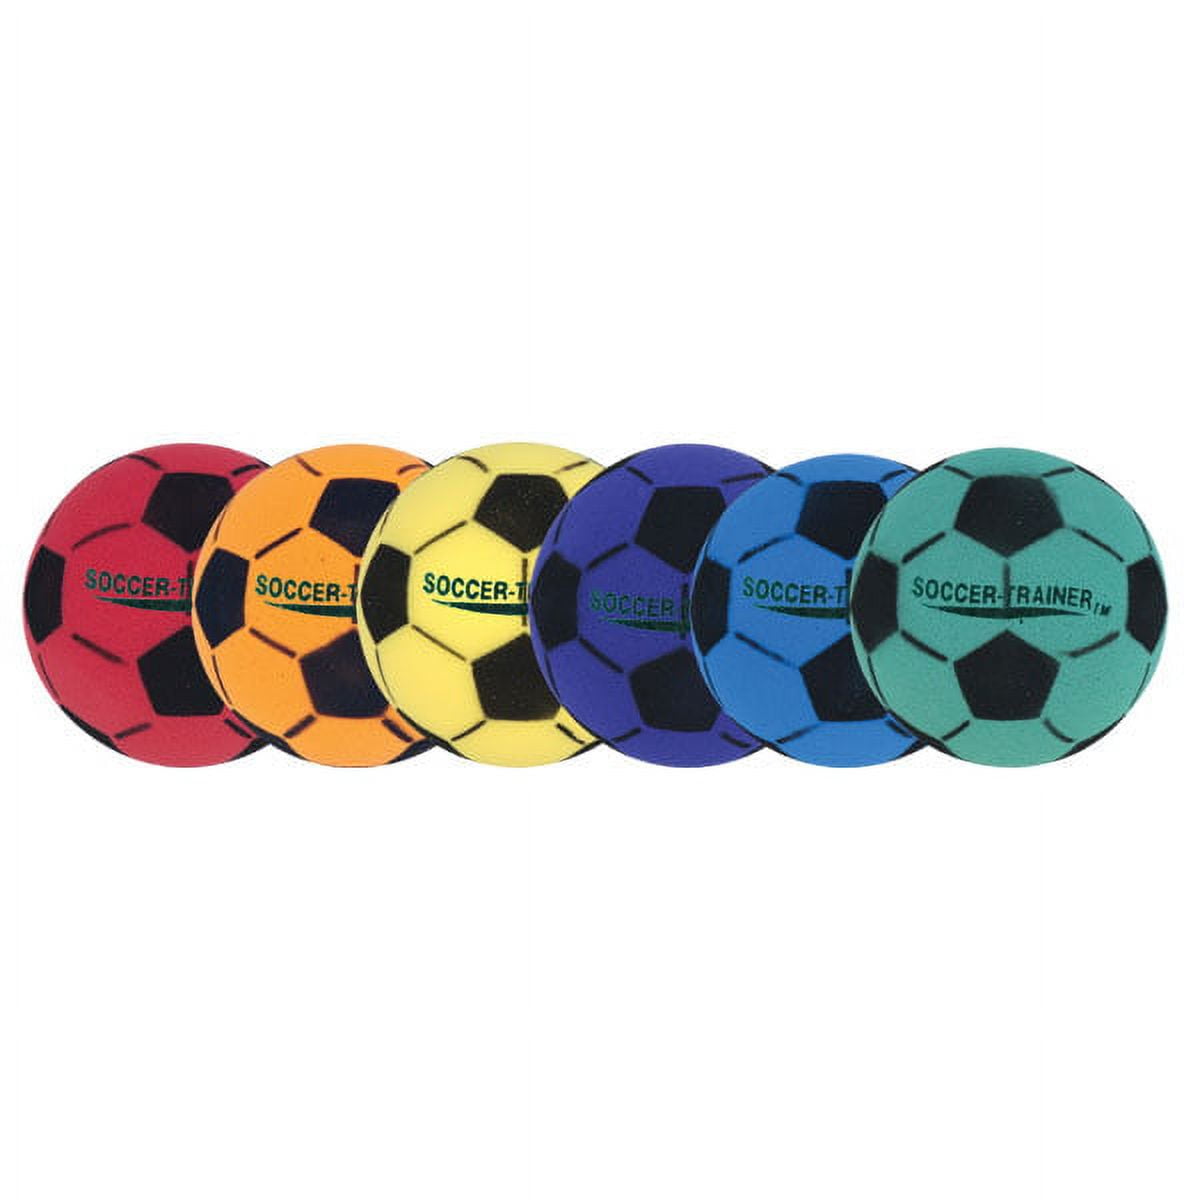 Picture of Champion Sports FSBSET Ultra Foam Soccer Ball Set, Multicolor - Set of 6